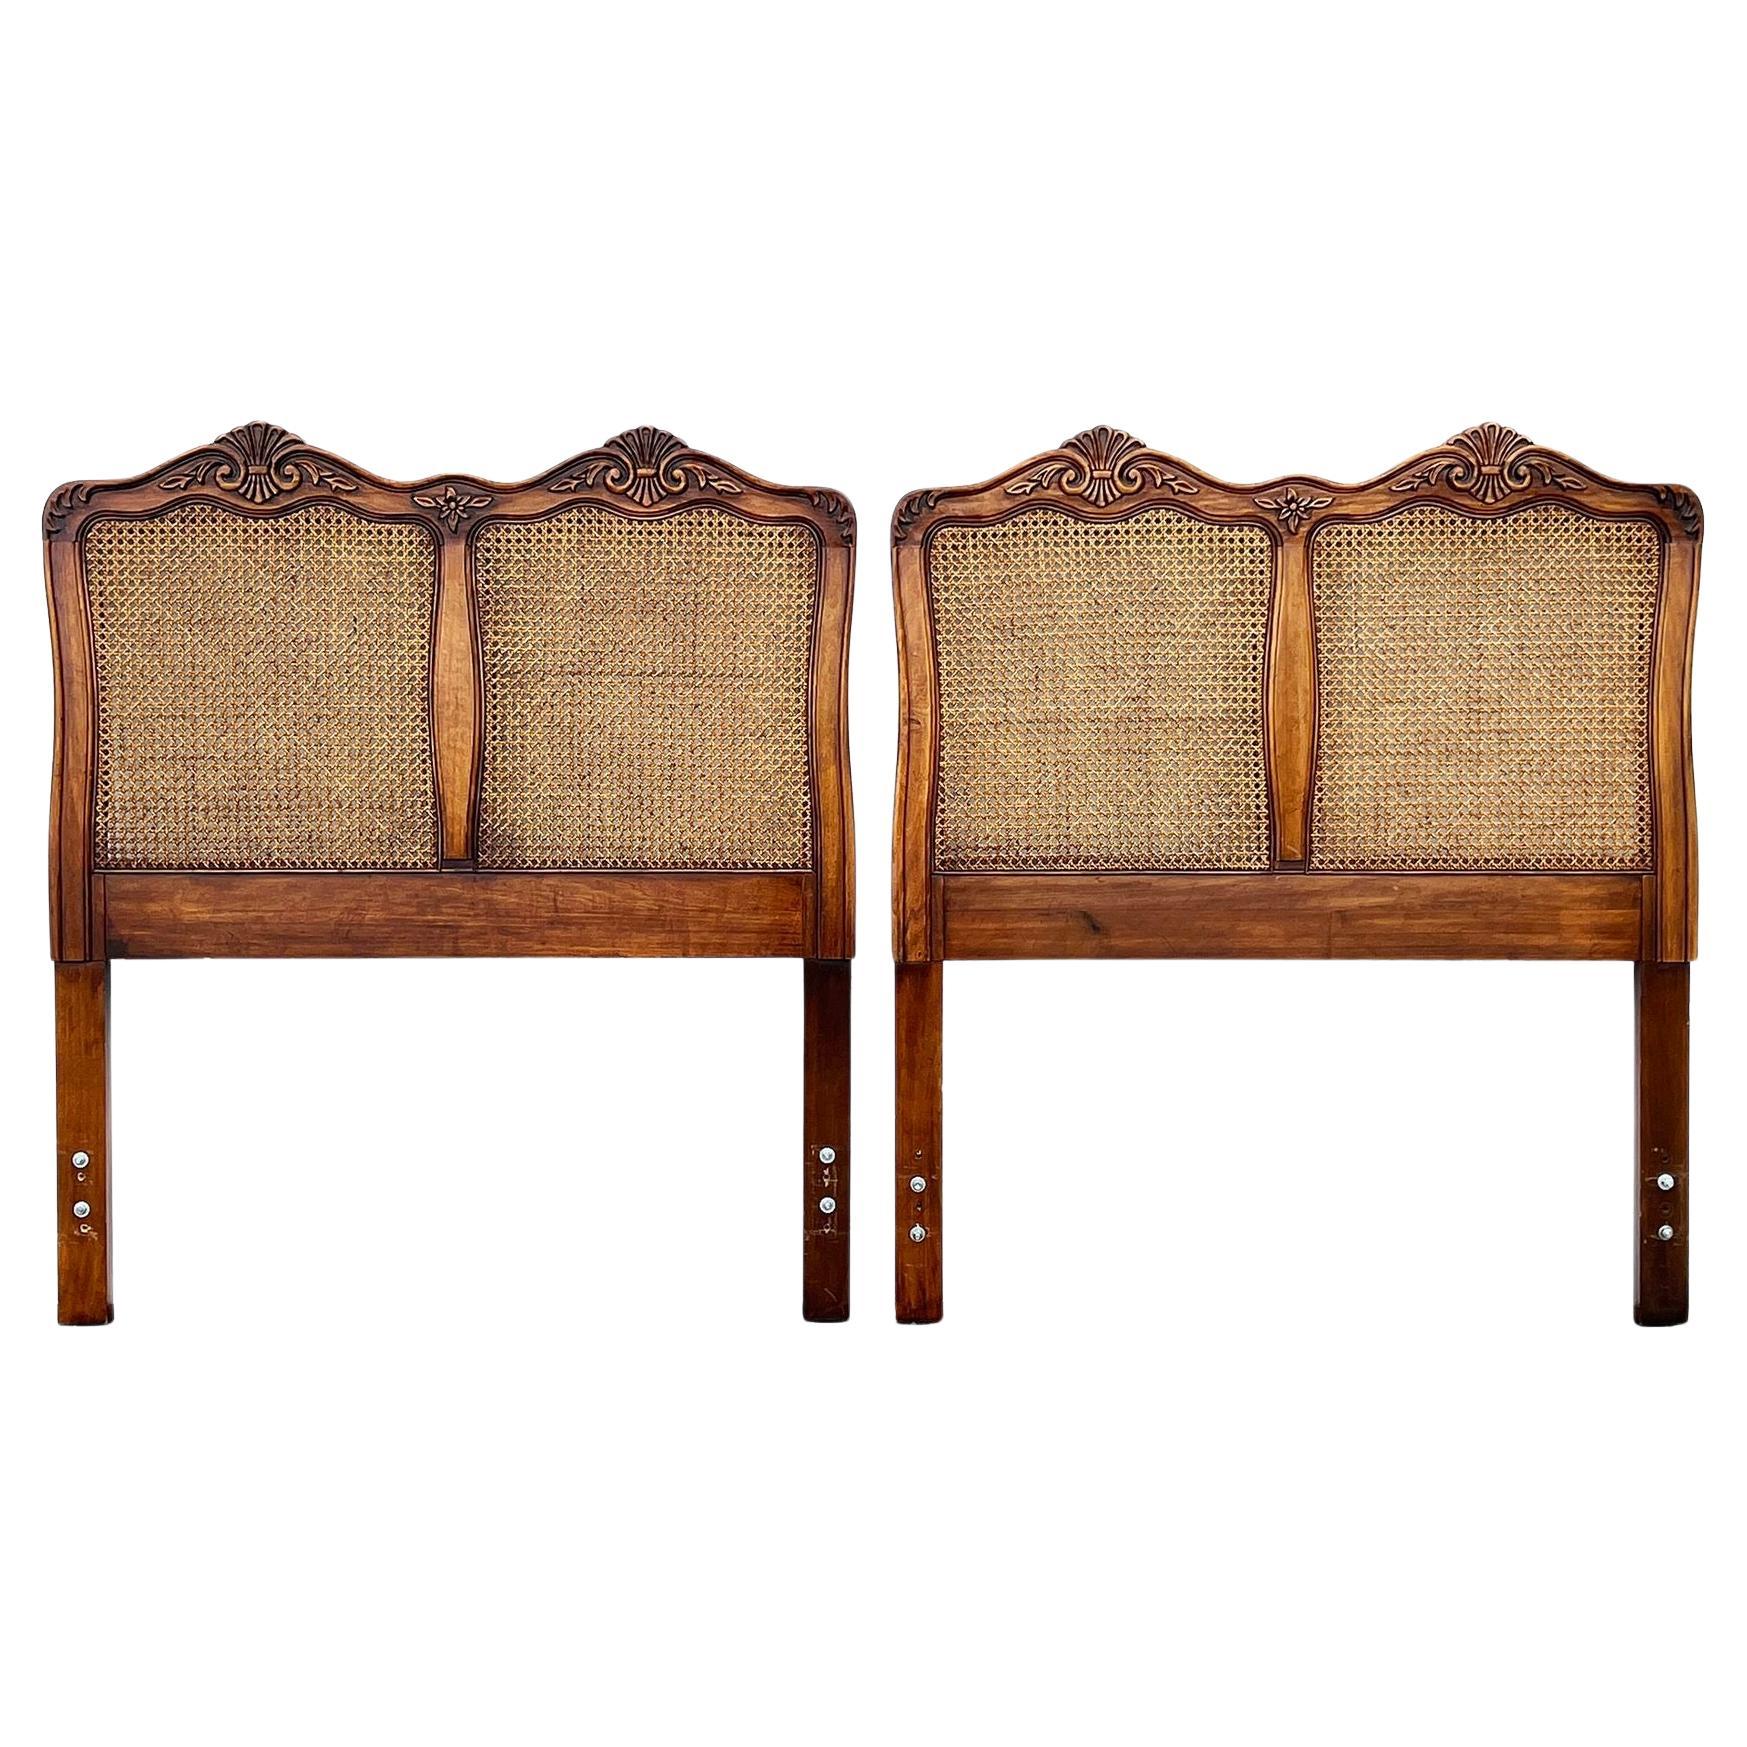 French Provincial Twin Headboards in Walnut and Caning attr. Henredon, pair